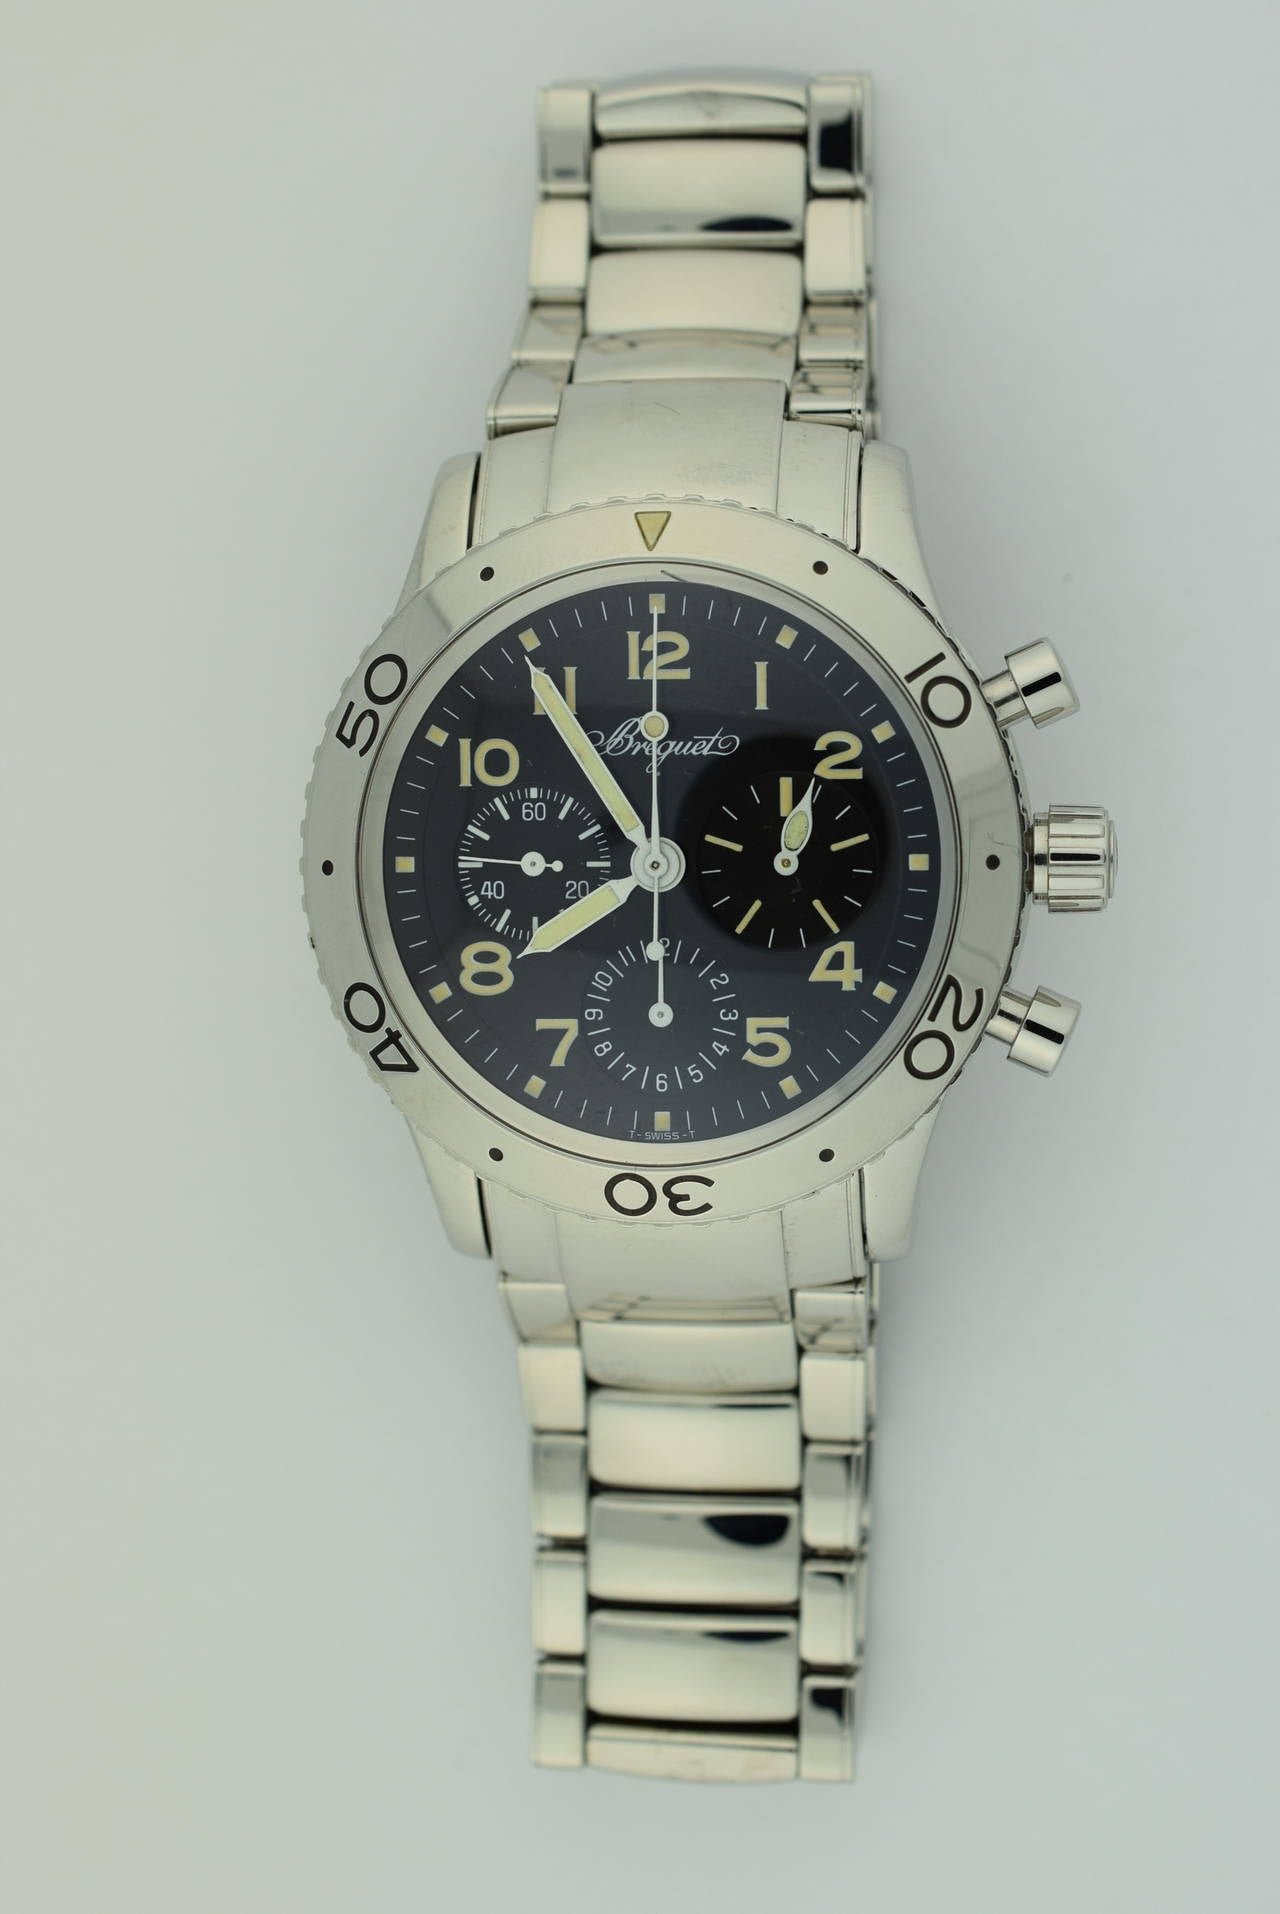 Breguet Stainless Steel Type XX Automatic Chronograph Wristwatch 1